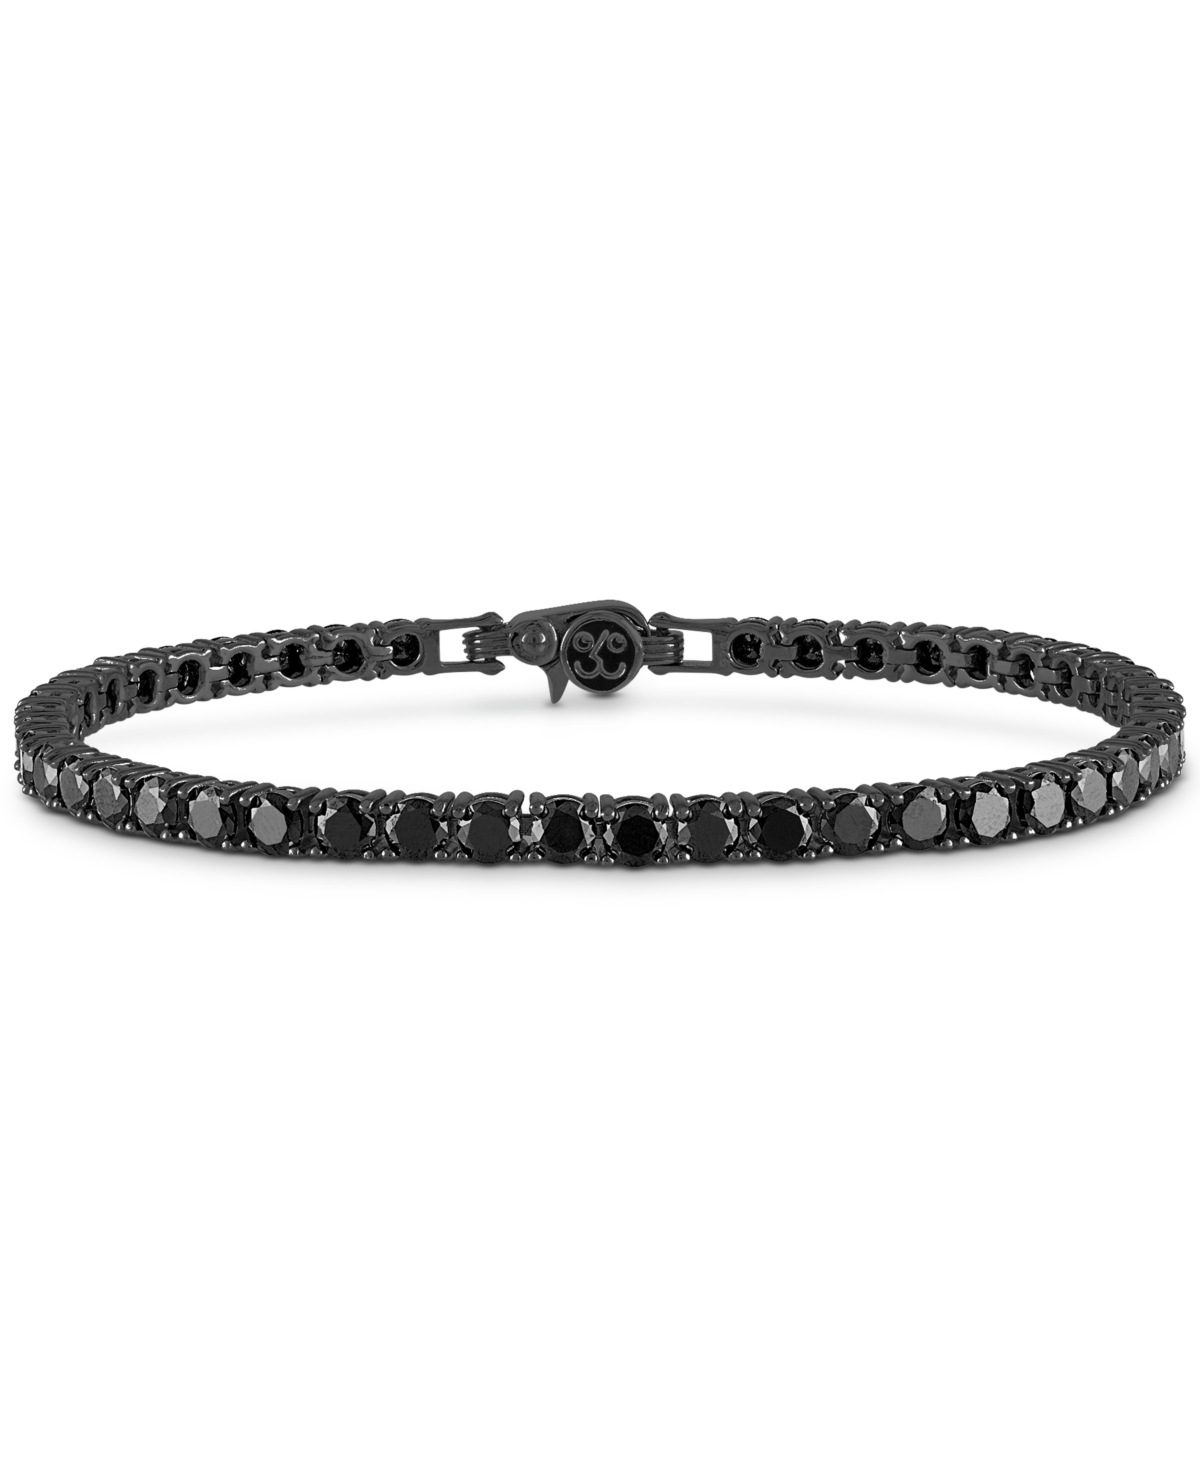 White Cubic Zirconia Tennis Bracelet in Sterling Silver (Also in Black Cubic Zirconia), Created for Macy's - Black